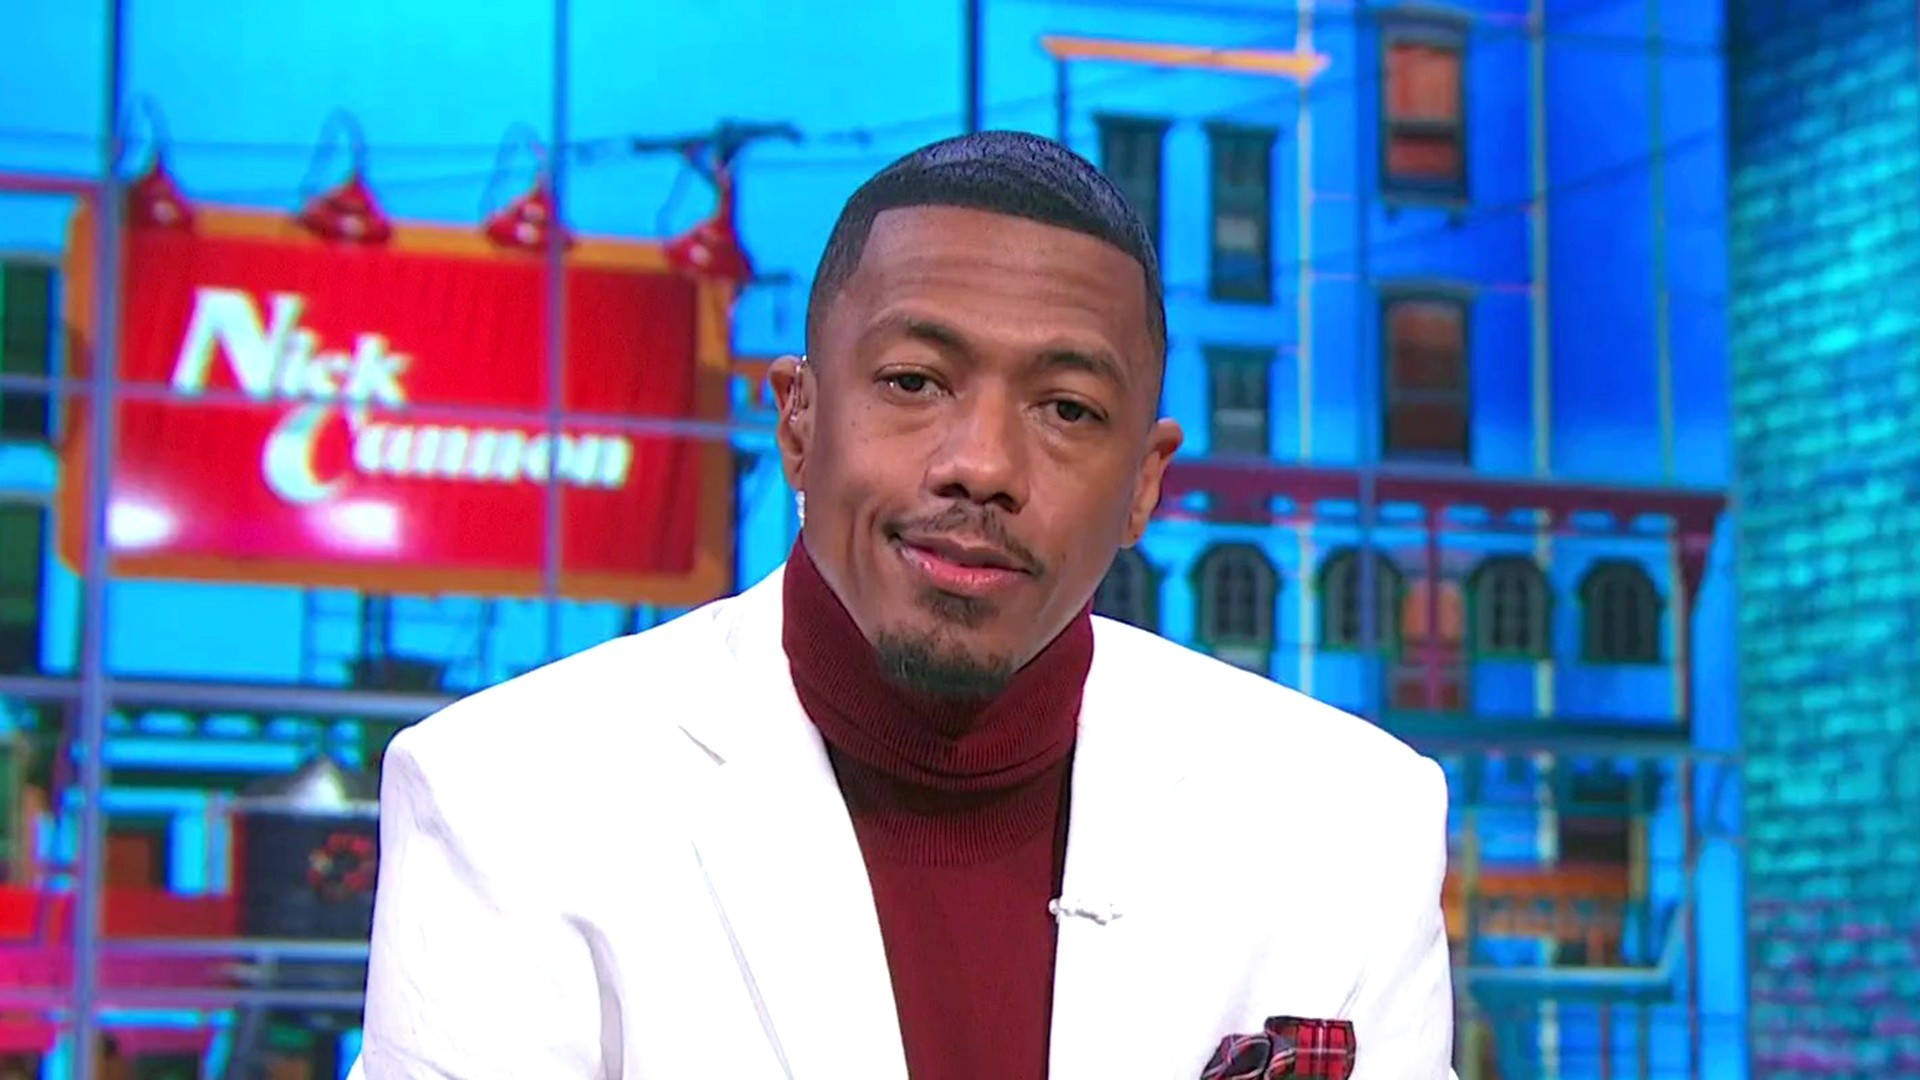 Nick Cannon With Turtleneck Background